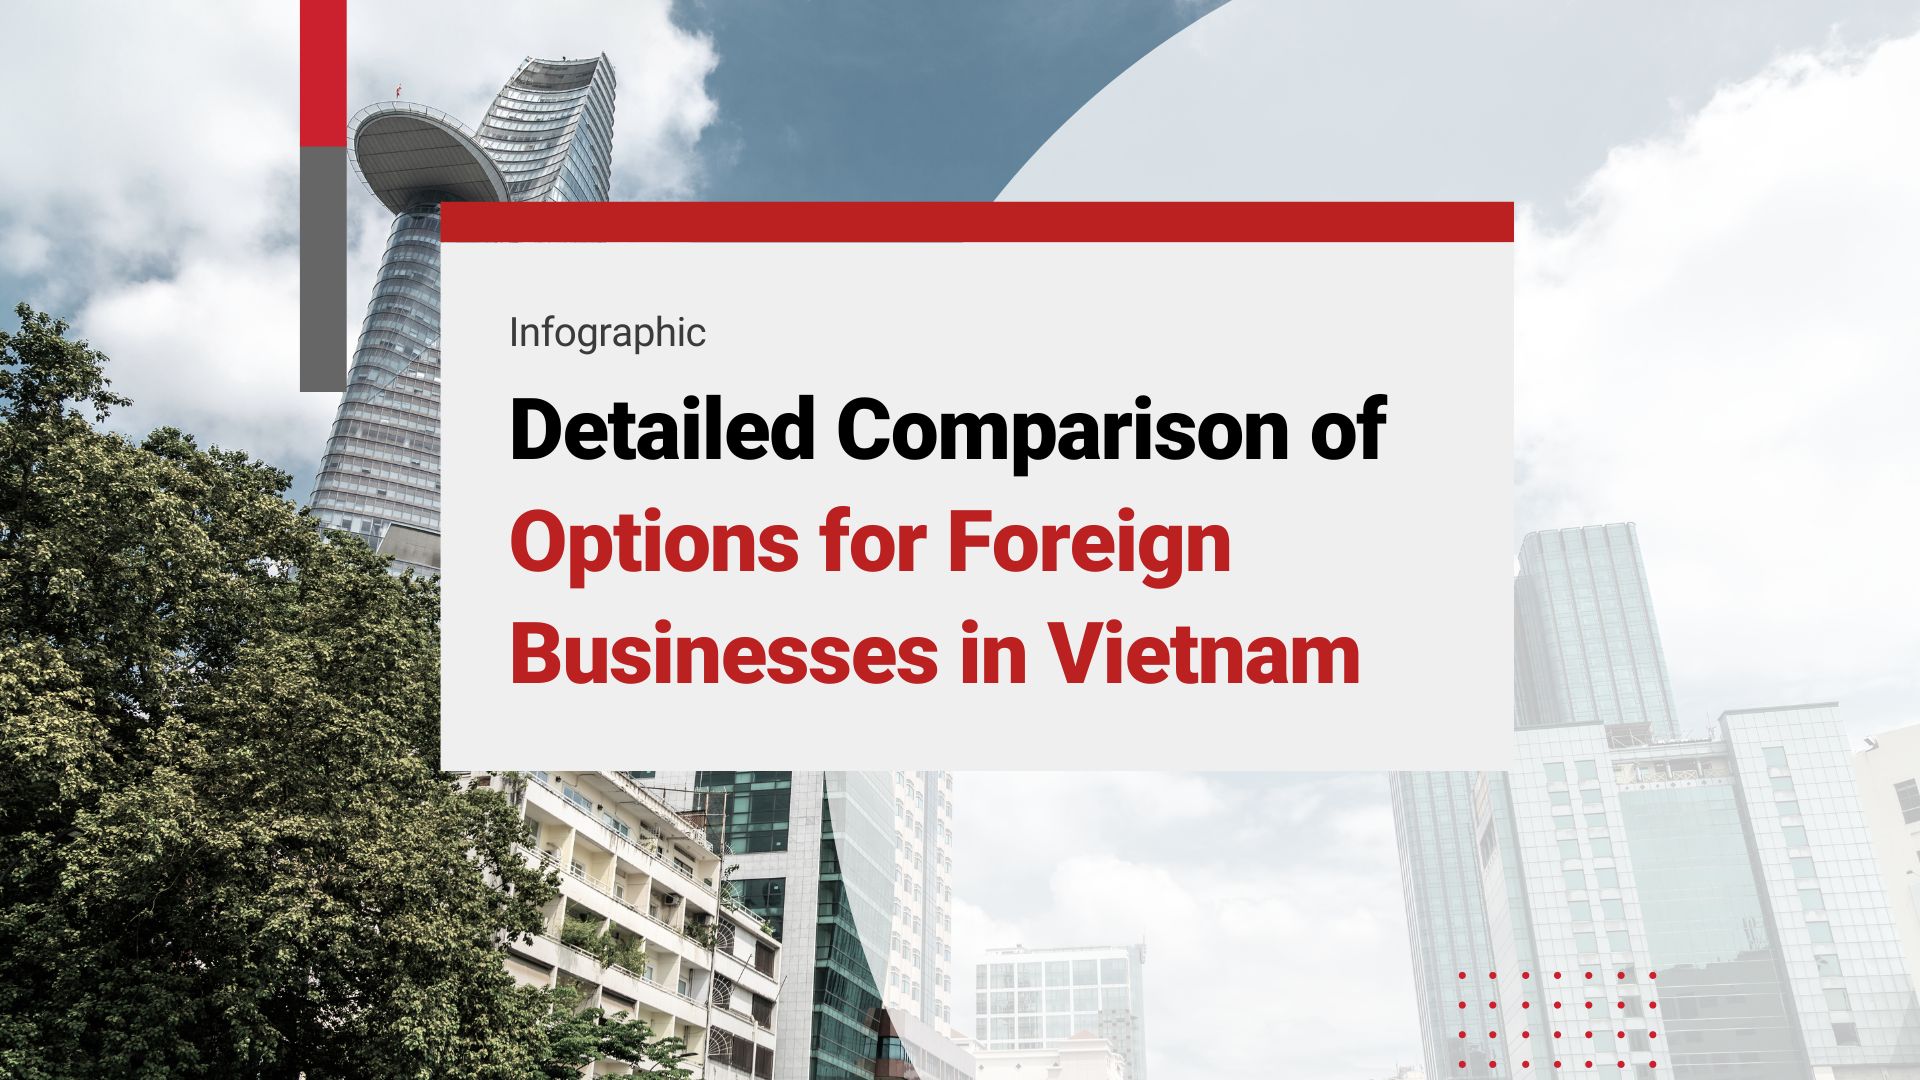 Detailed Comparison of Entity Options for Foreign Businesses in Vietnam